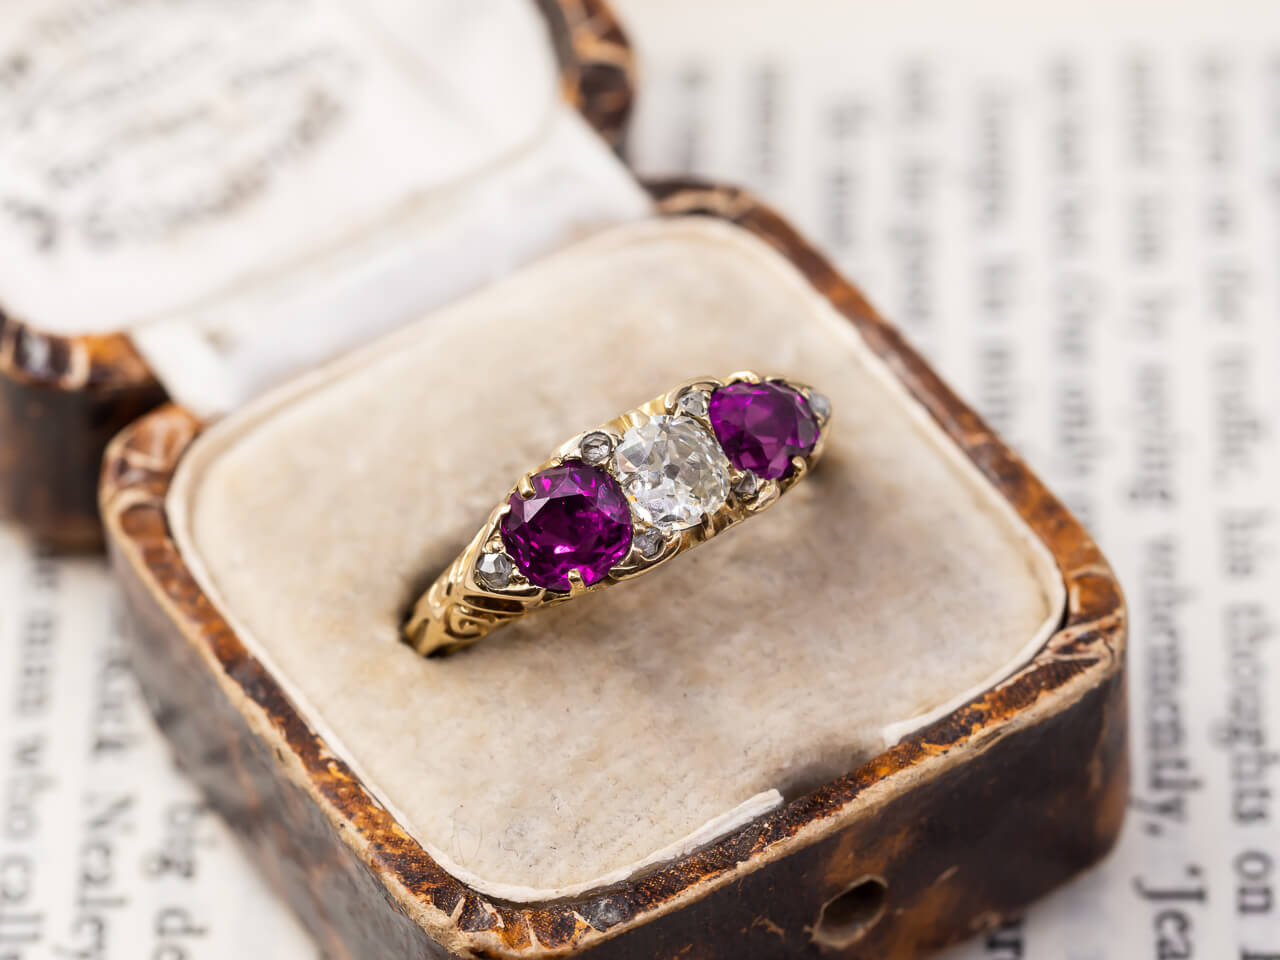 A pink gemstone engagement ring with a vintage design.